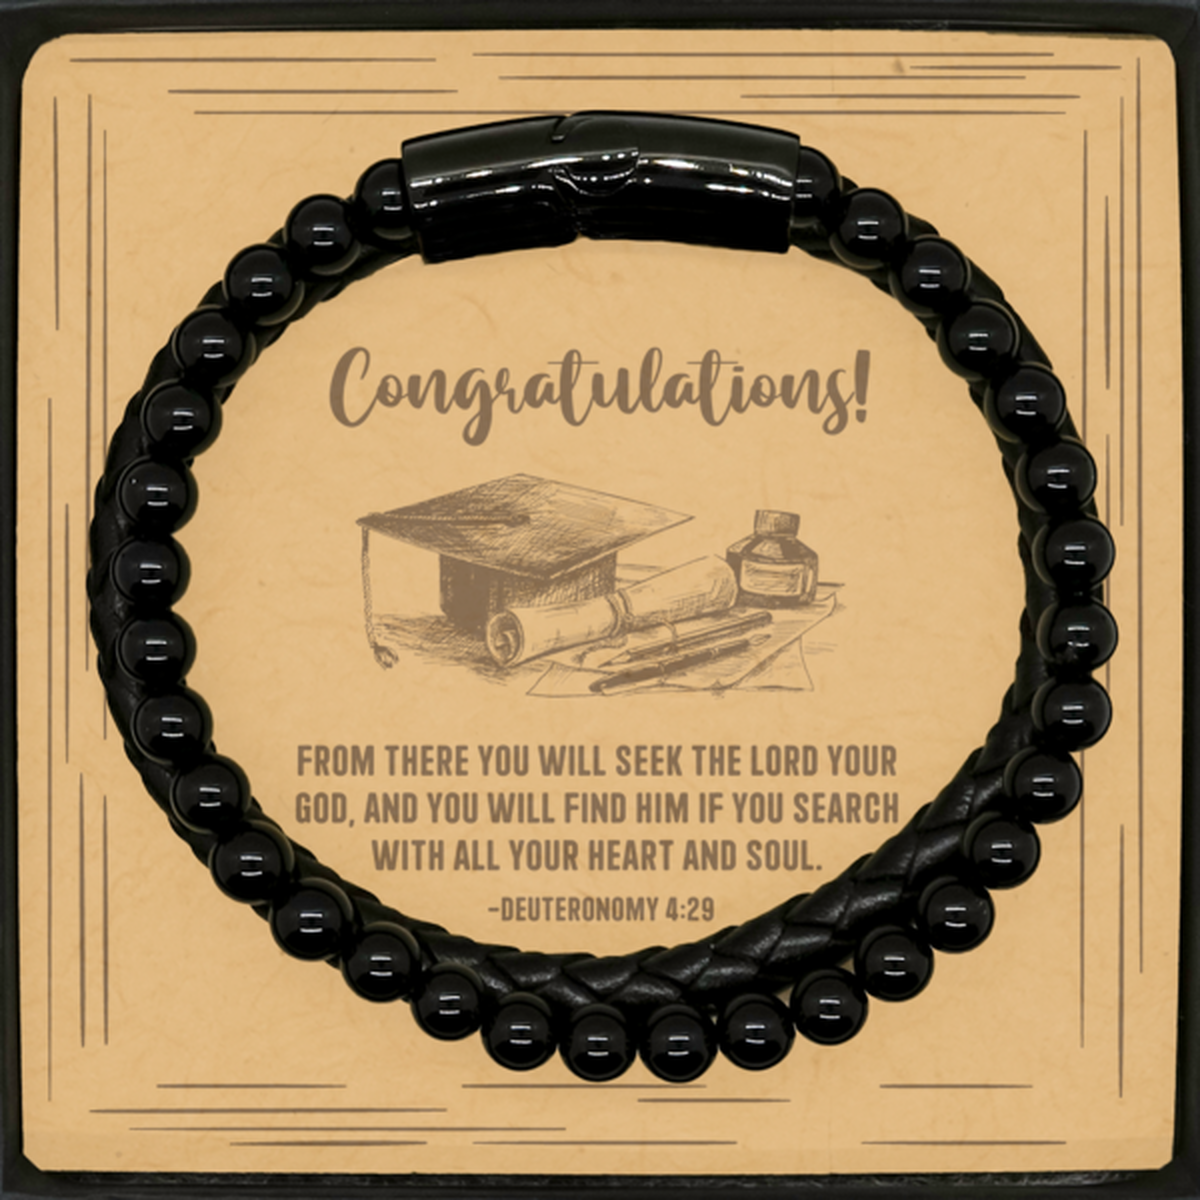 Religious Graduation Cards, From there you will seek the Lord your God, Bible Verse Stone Leather Bracelet, Christian Graduation Gifts